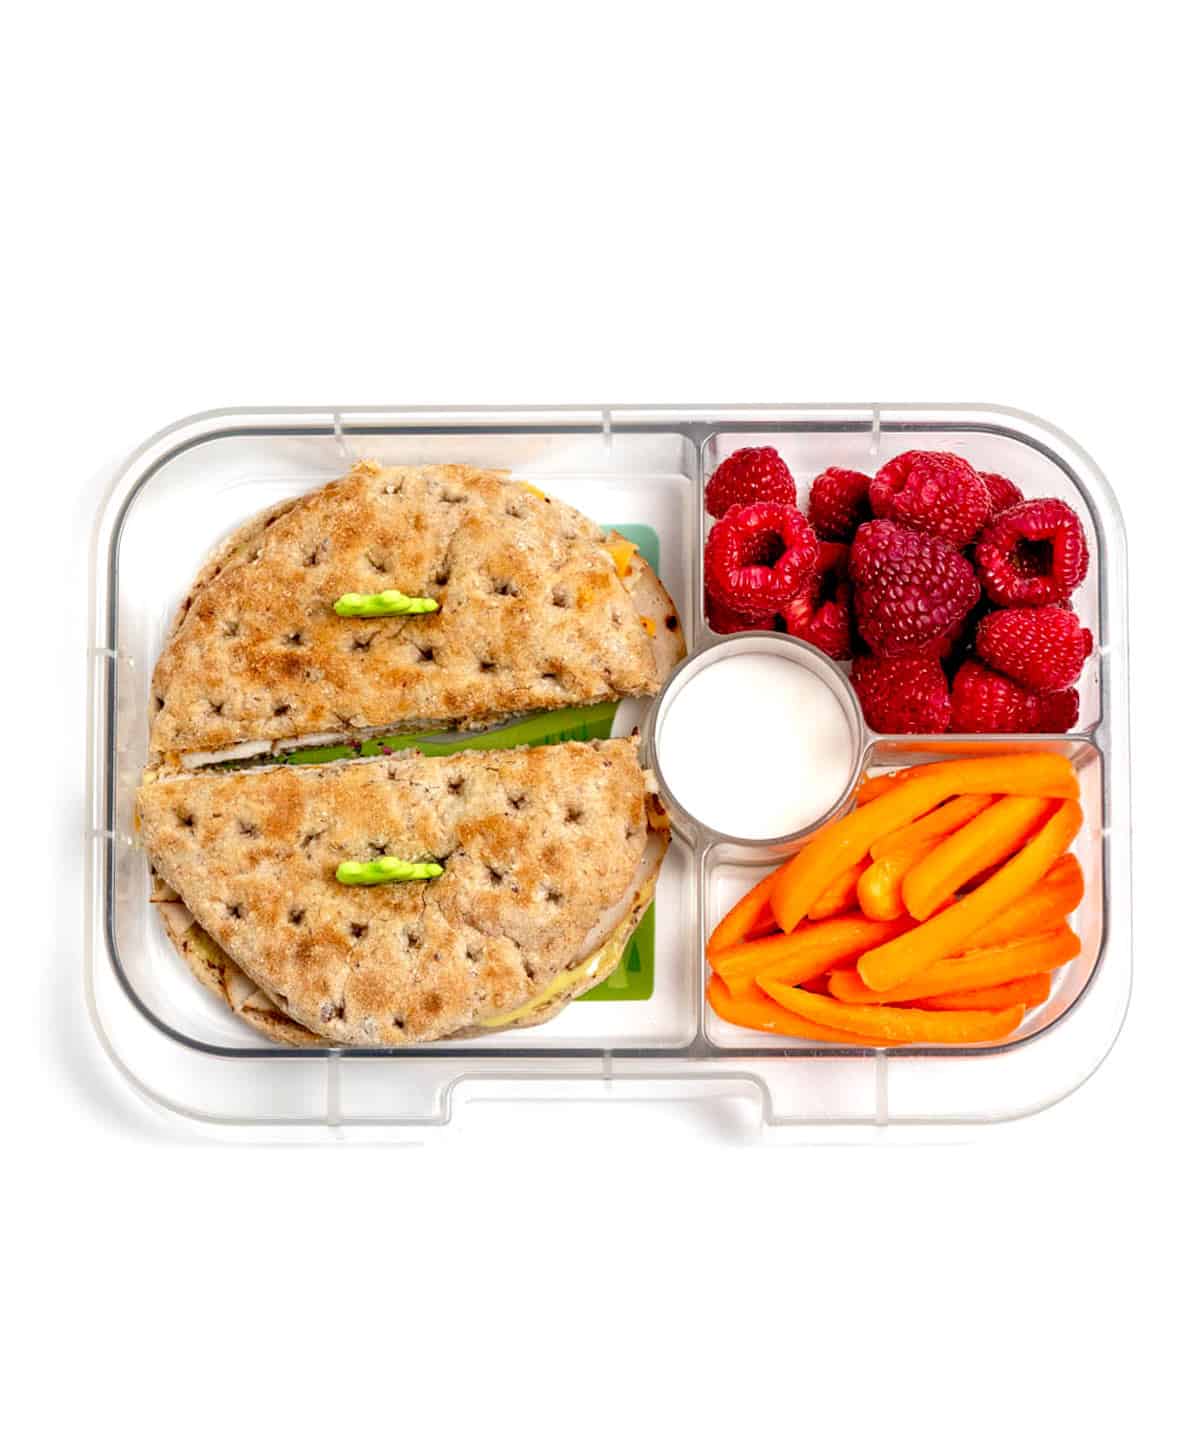 A turkey, cheese and honey mustard sandwich with carrot slices, dip and raspberries.